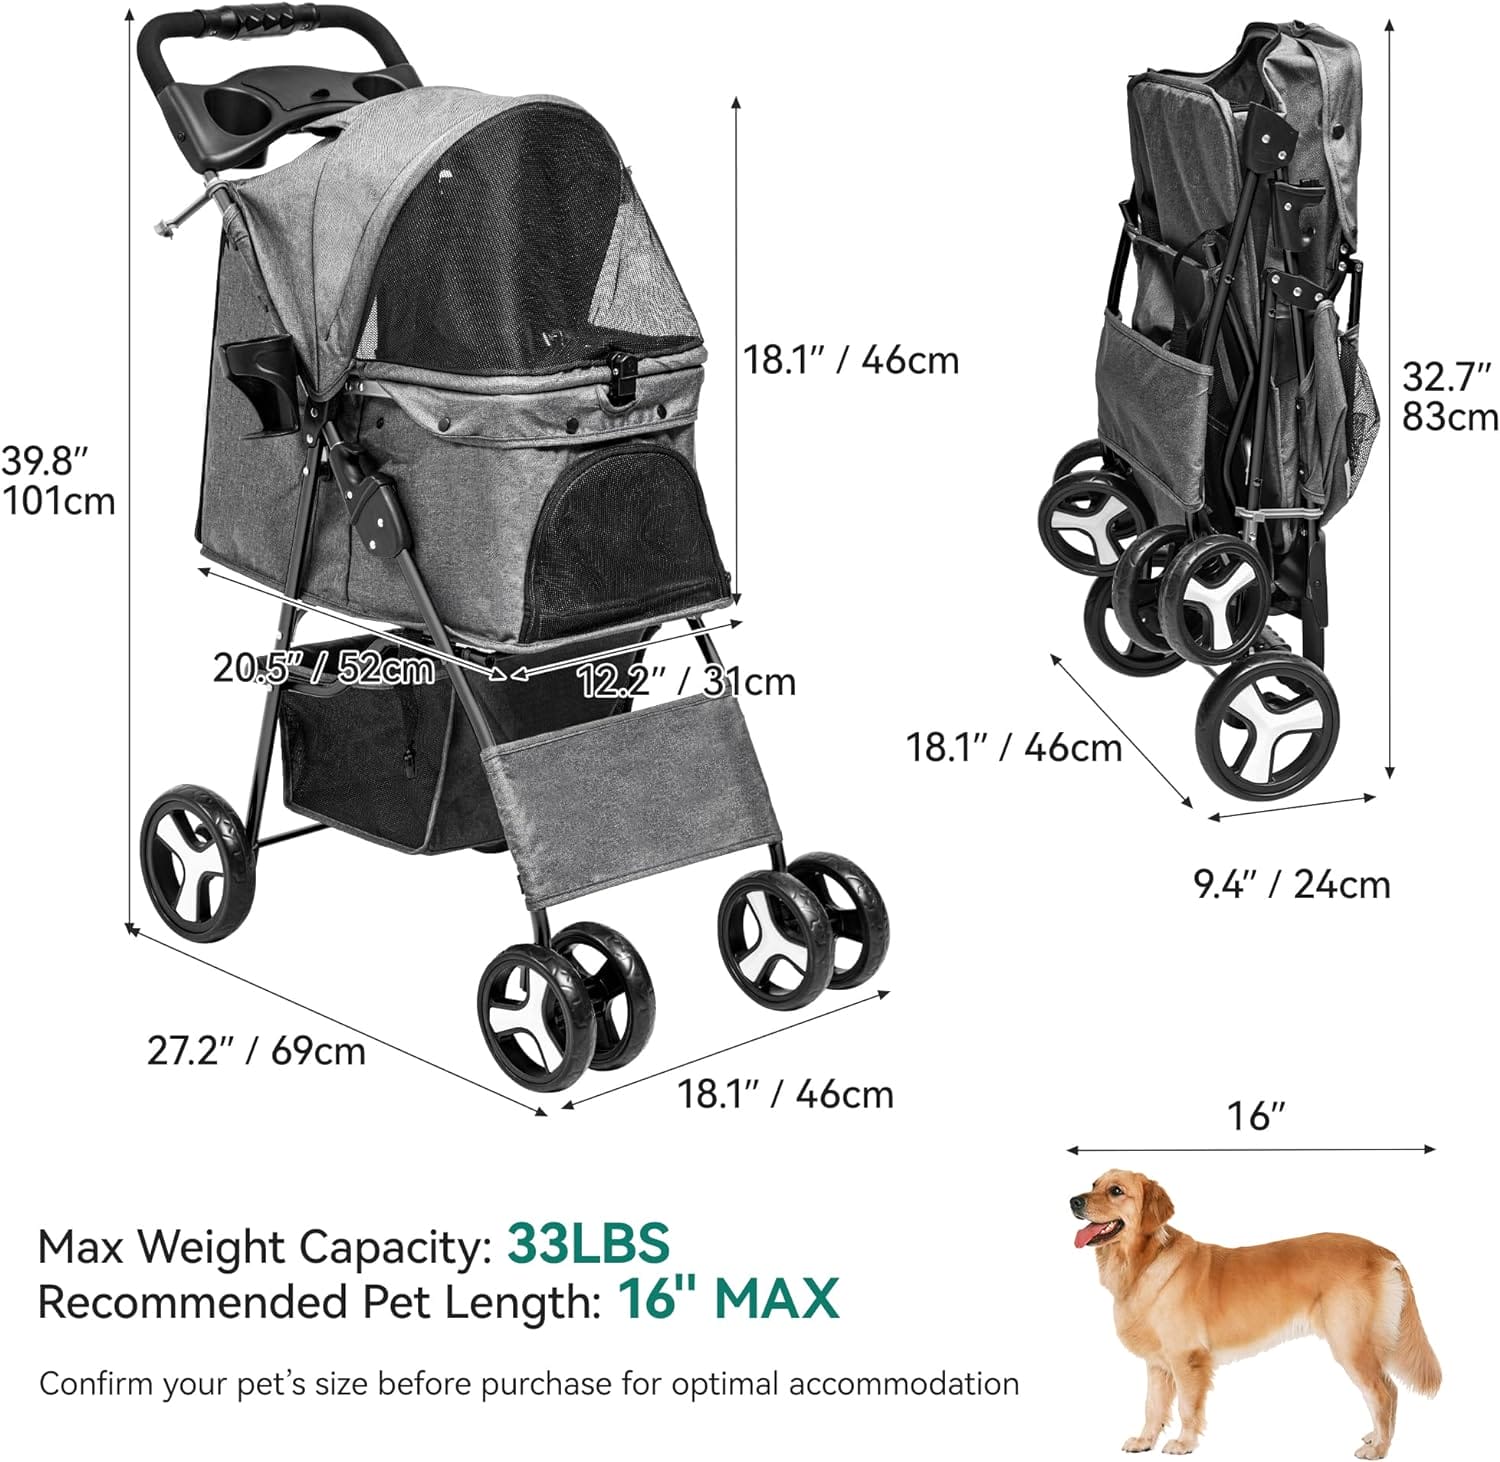 YITAHOME Dog Stroller Review